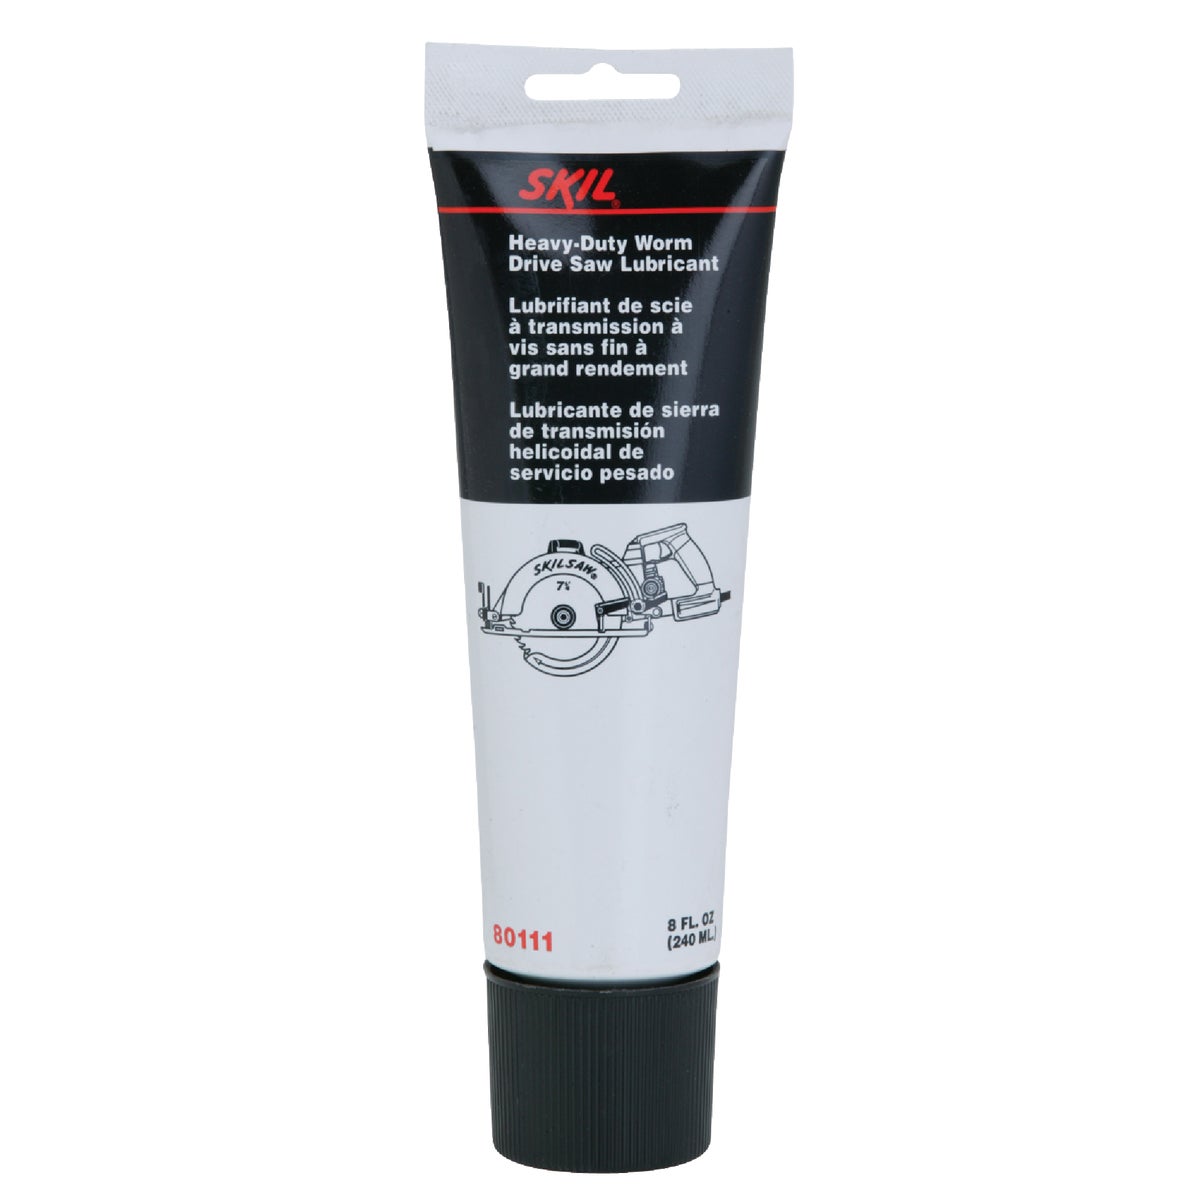 Item 316121, Heavy-duty lubricant for use on worm drive saws.